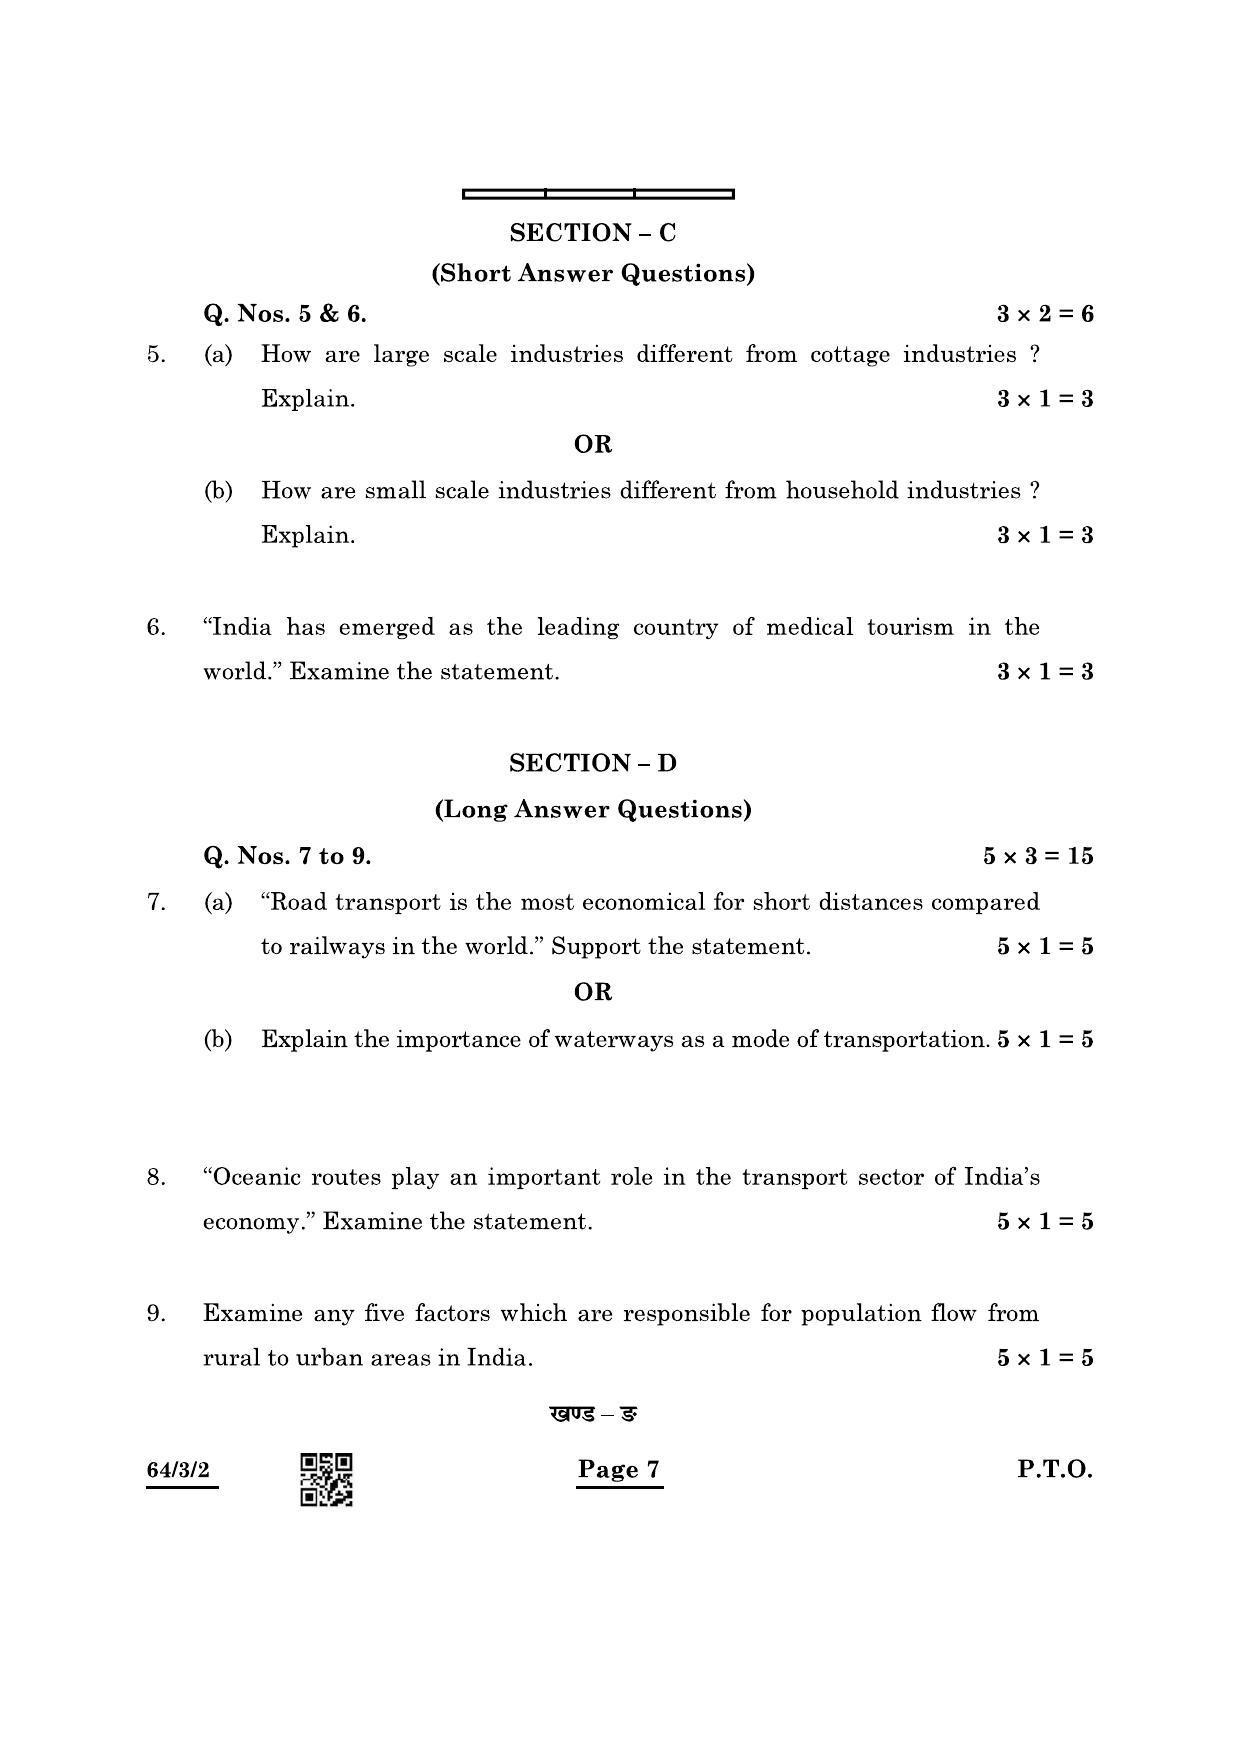 CBSE Class 12 64-3-2 Geography 2022 Question Paper - Page 7